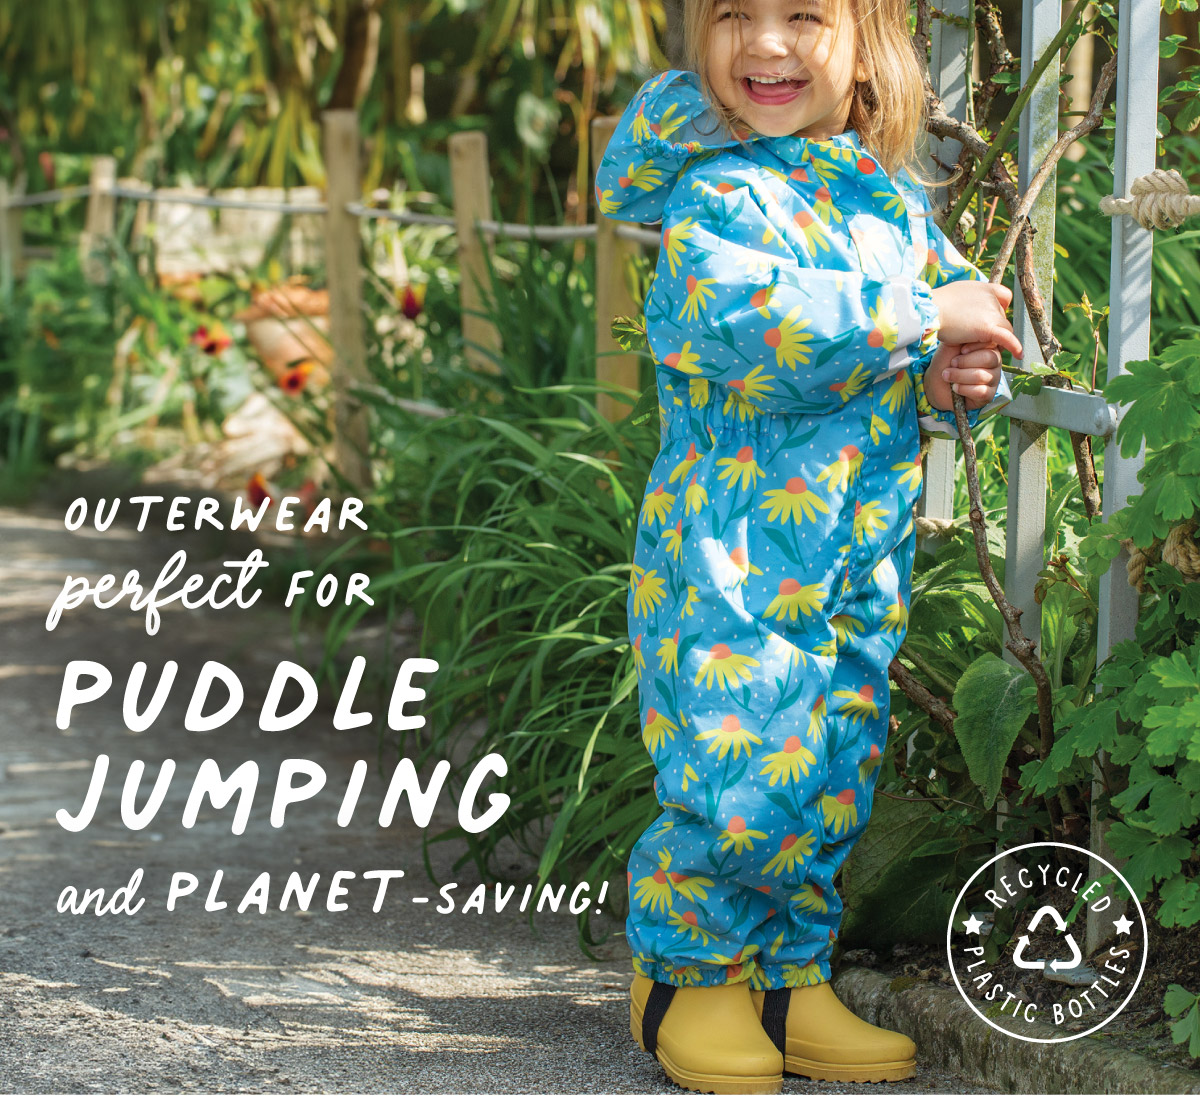 Outerwear perfect for puddle jumping and planet-saving